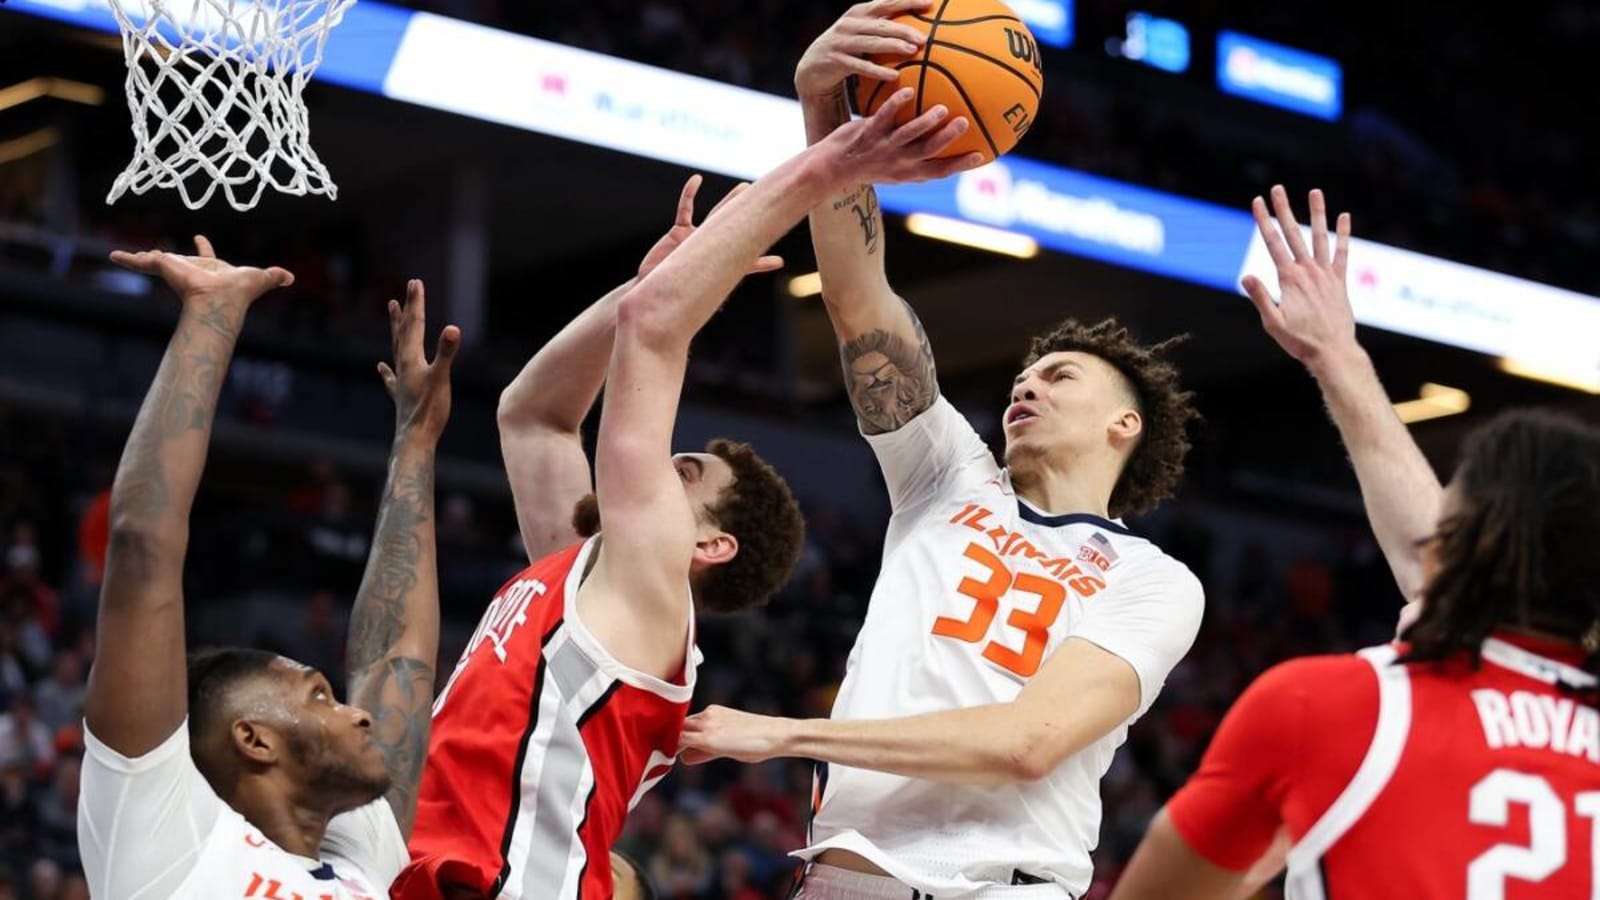 Illinois&#39; Coleman Hawkins Shows He Can Bring The Intangibles, Too